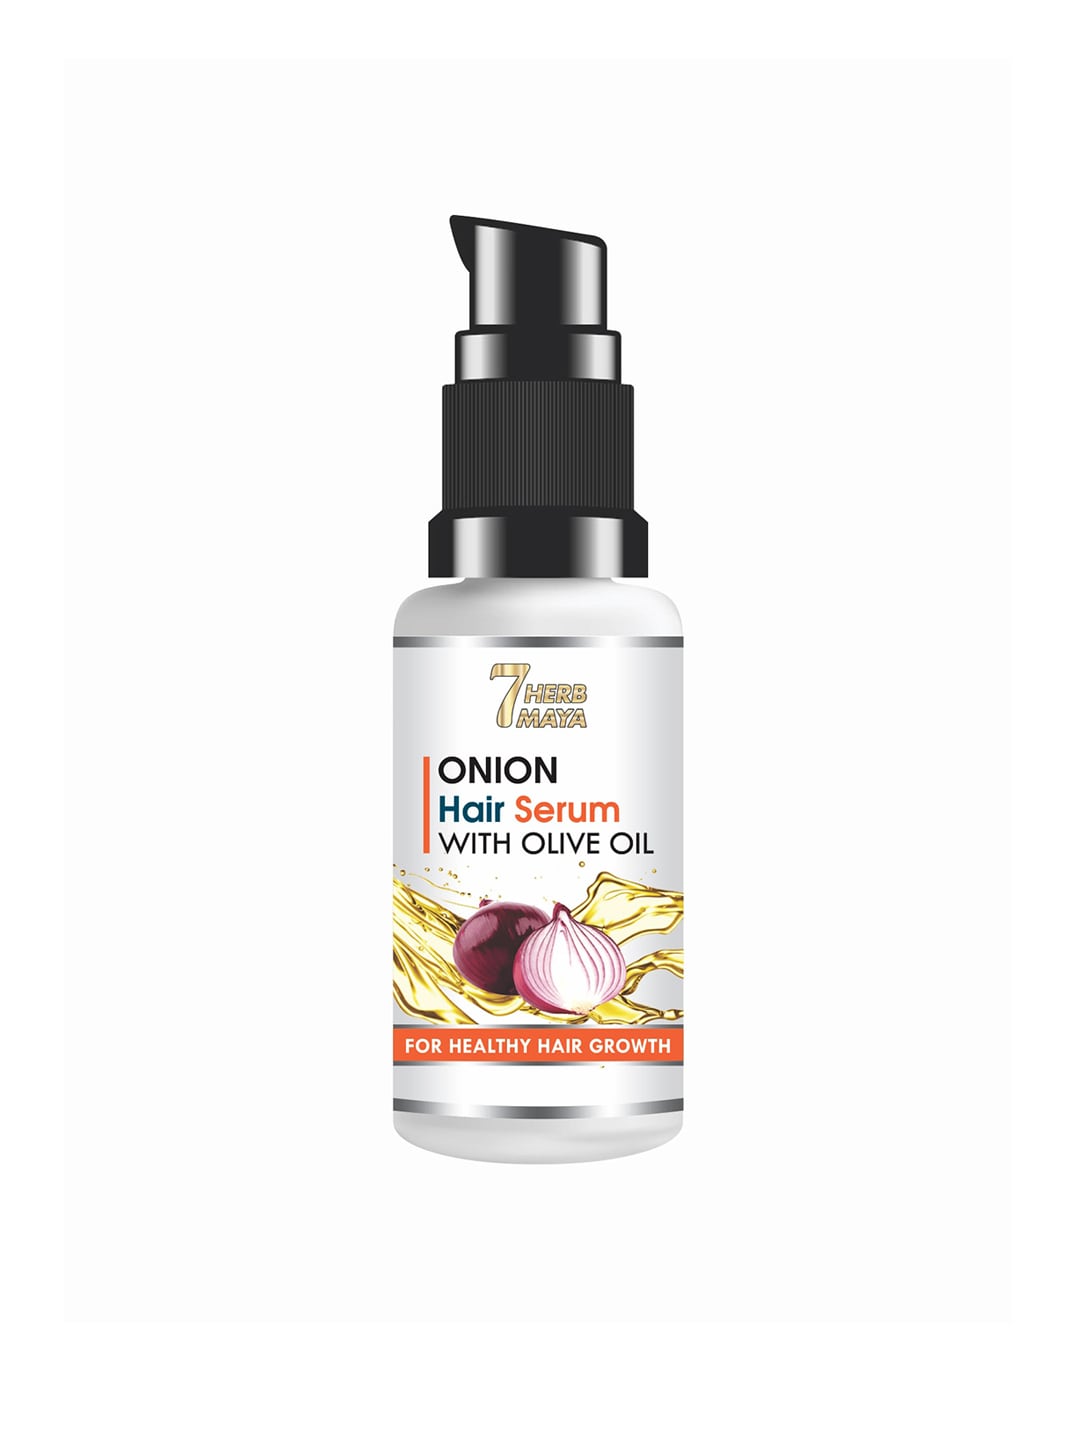 7Herbmaya Onion Hair Serum with Olive Oil for Healthy Hair Growth - 30 ml Price in India